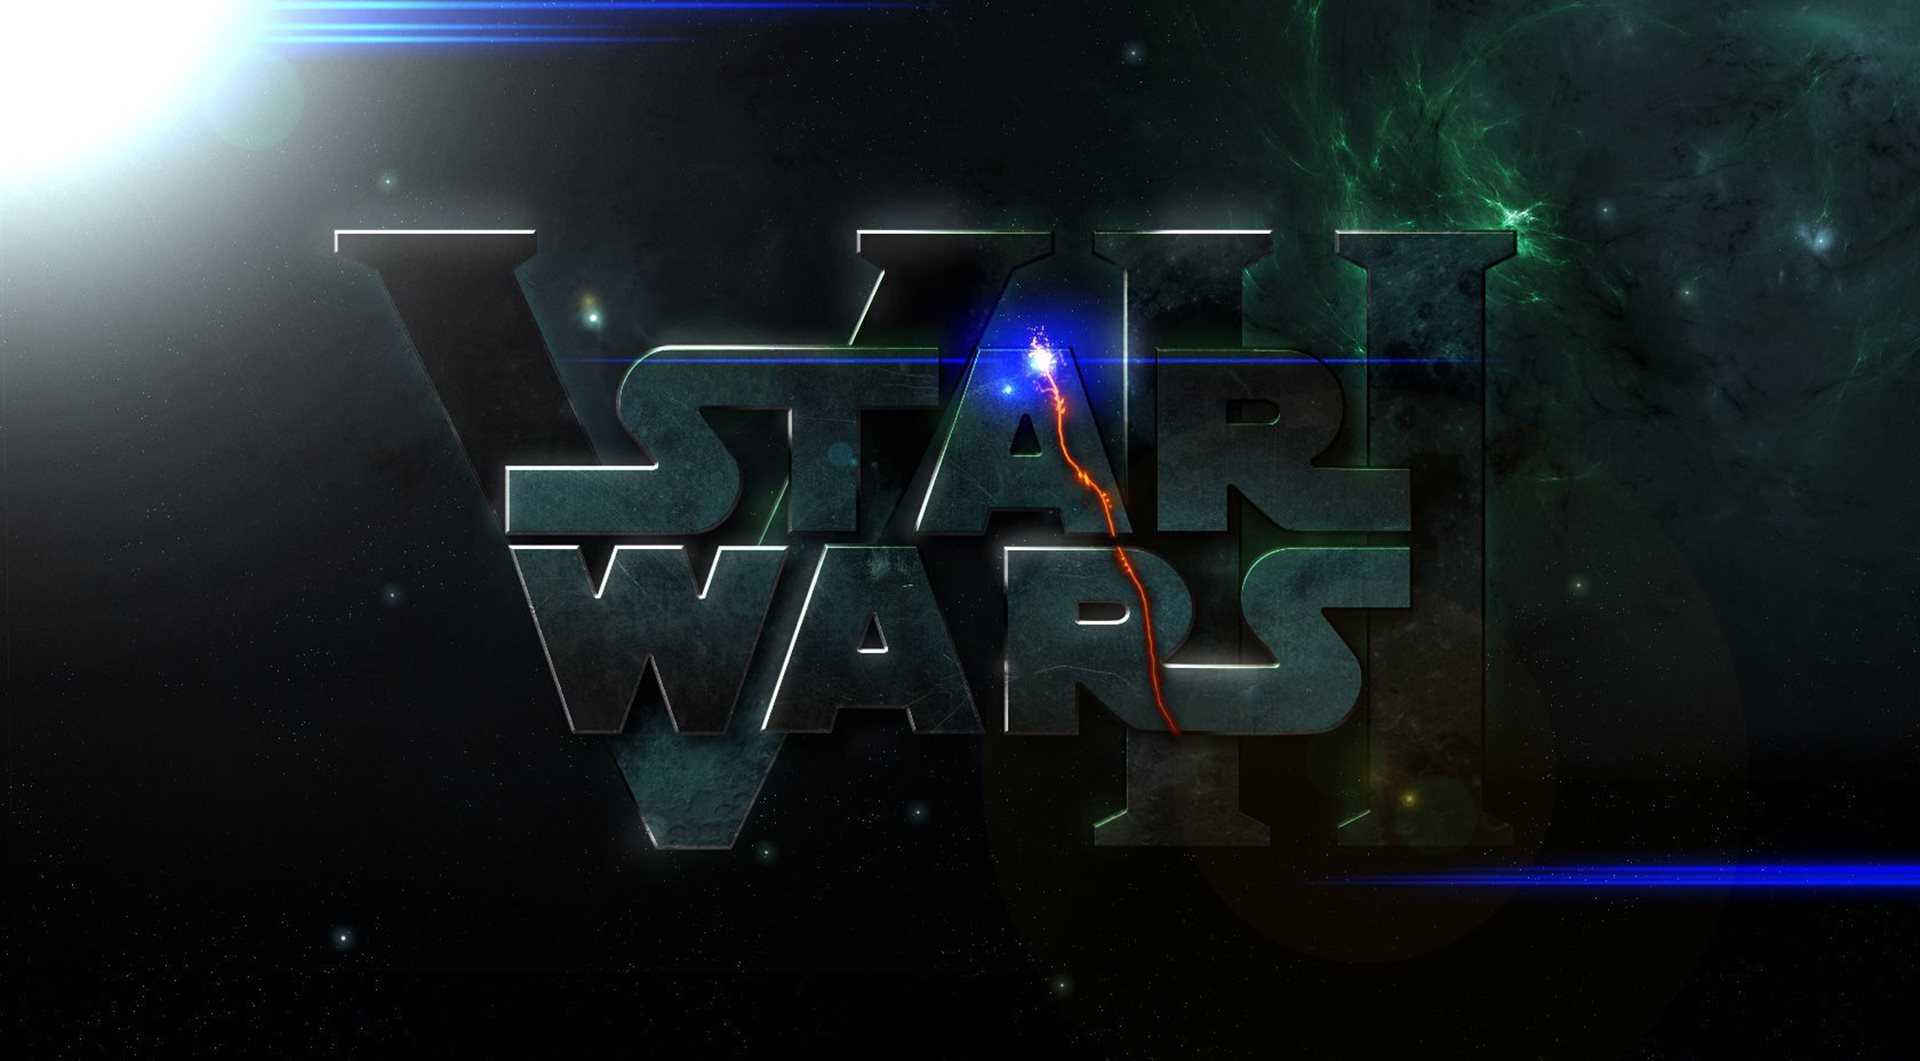  force awakens 2015 film hd wallpaper search more high definition 1080p 1920x1061